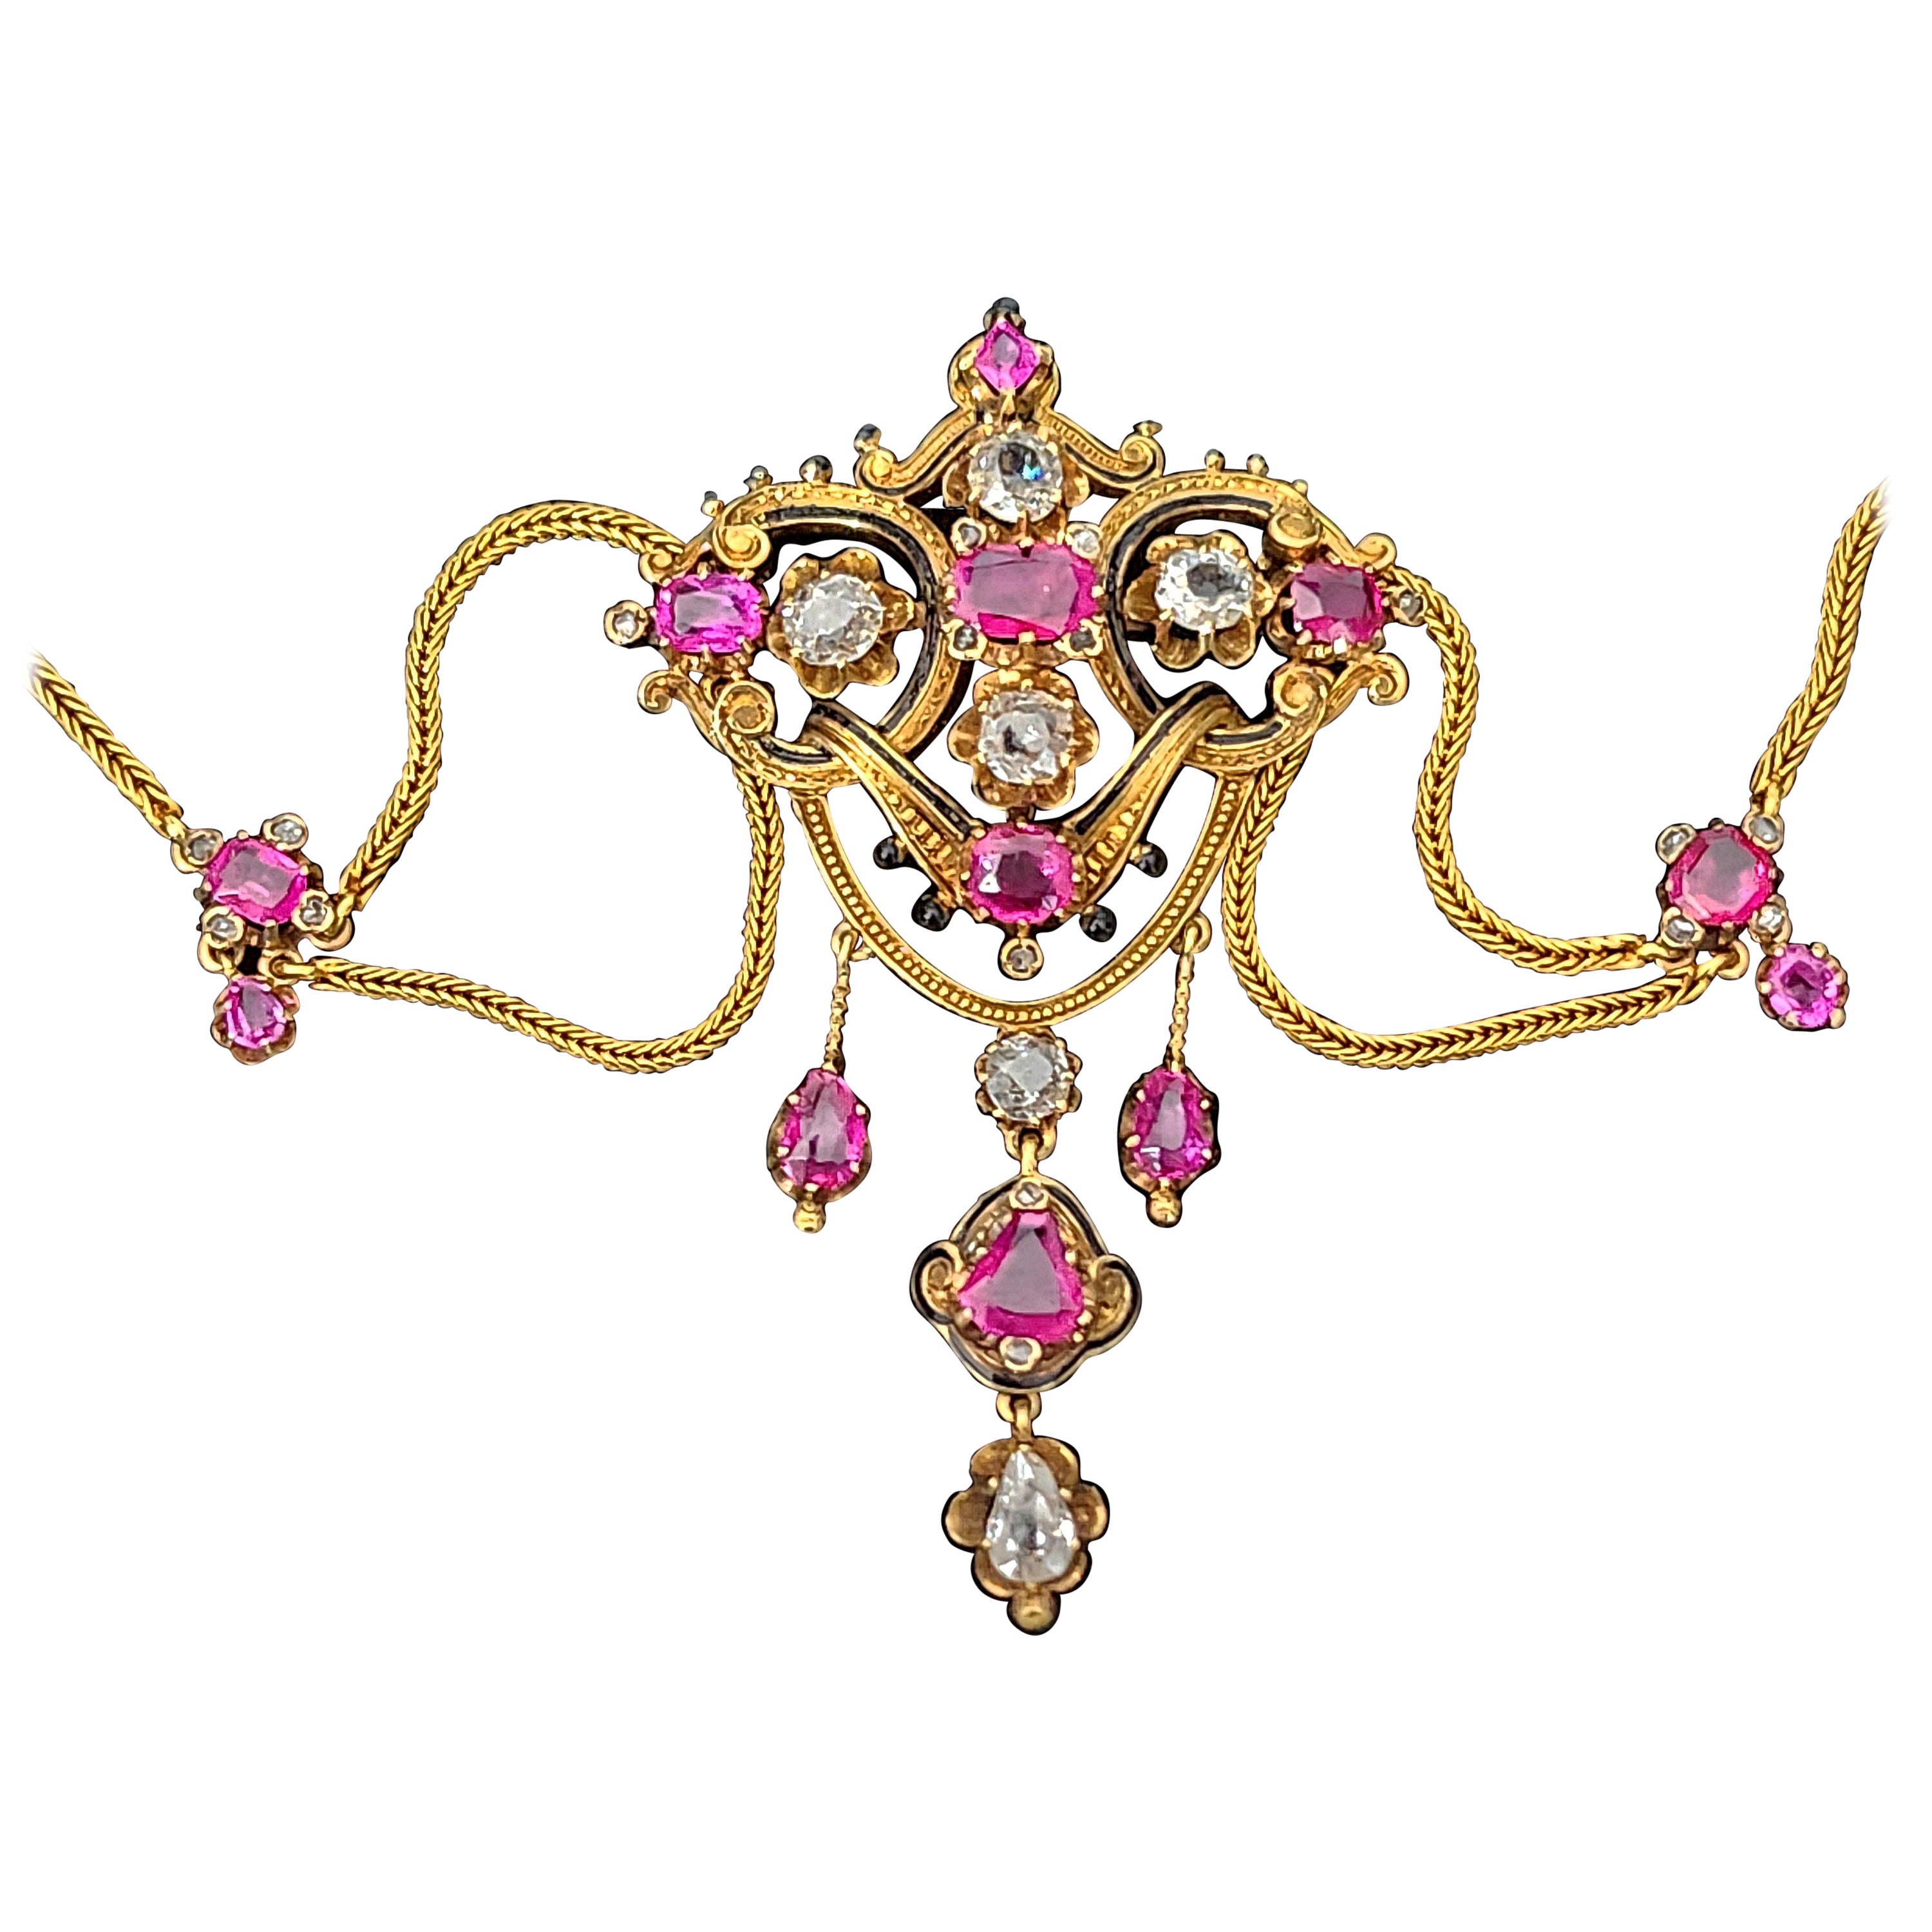 Antique 19th century art nouveau necklace in 18k gold with an estimate natural rubies of 6 carats and old mine cut diamonds 3.5 carats white color no inclousions decorted with black enamel in excellent condition